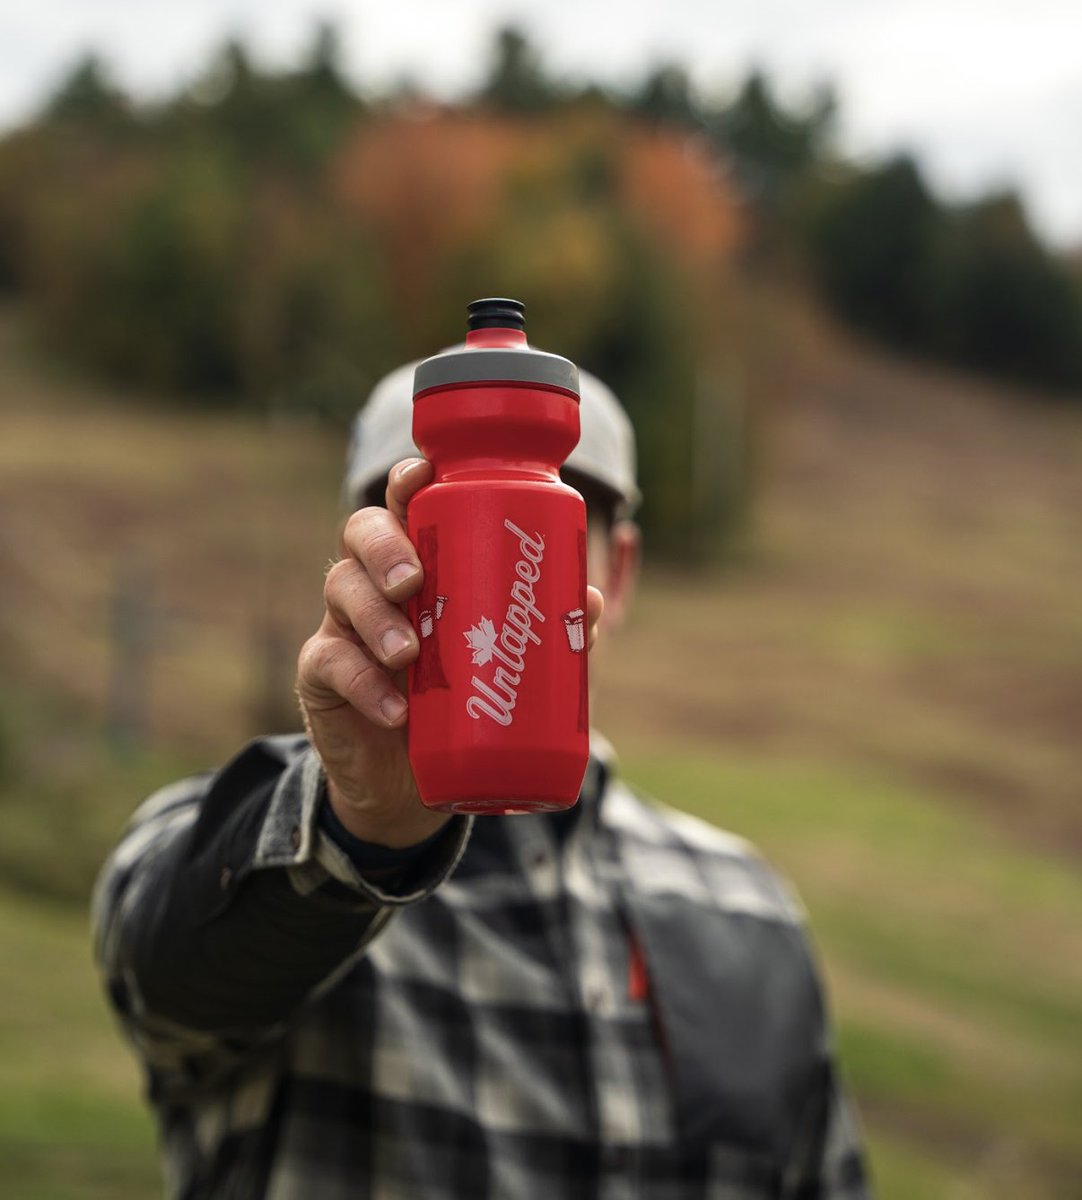 No matter the activity, hydration is important. This catchy bottle has you hydrating in style! untapped.cc/product/purist…